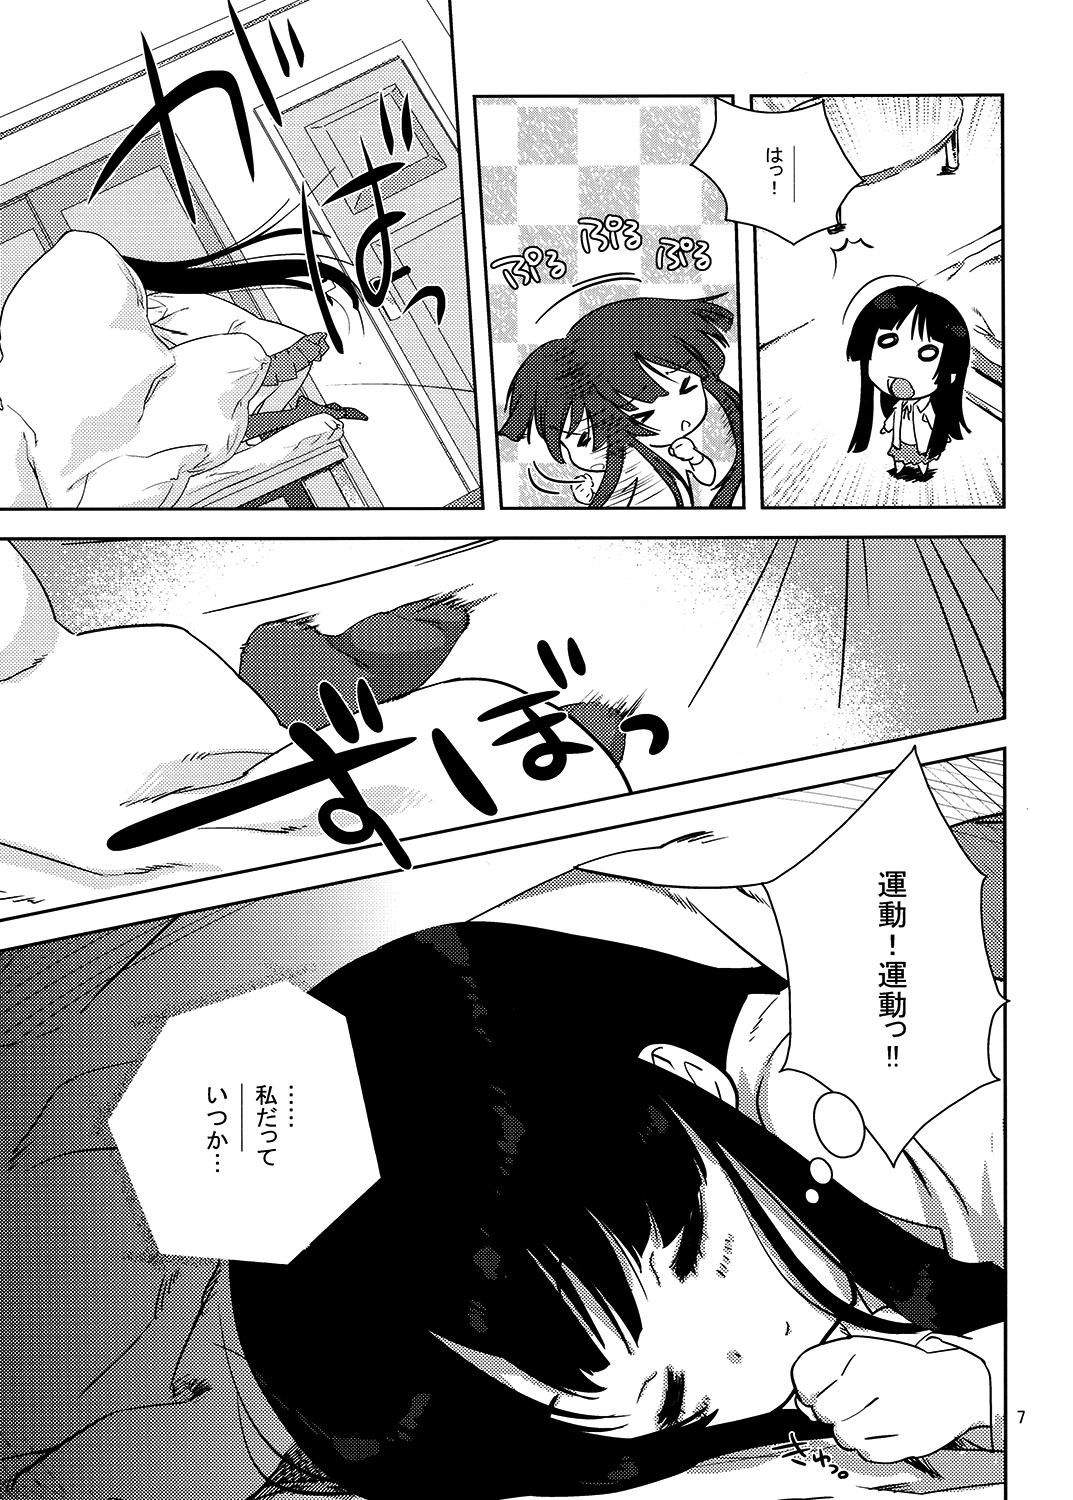 Pussyfucking Mio-tan! - K on Indian - Page 6